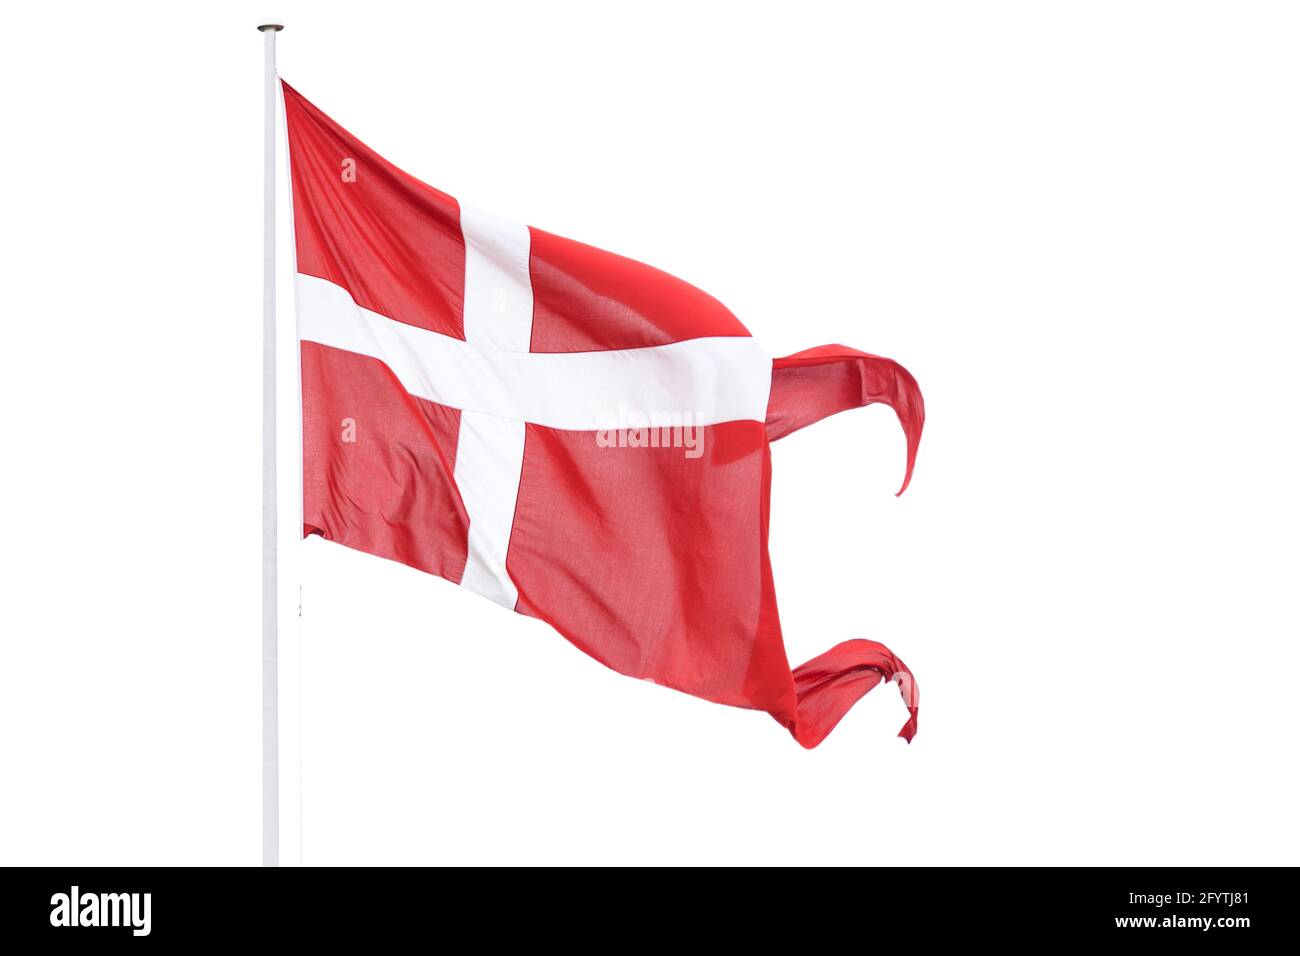 Waving flag of Denmark isolated on white. PNG file with transparent background. Stock Photo